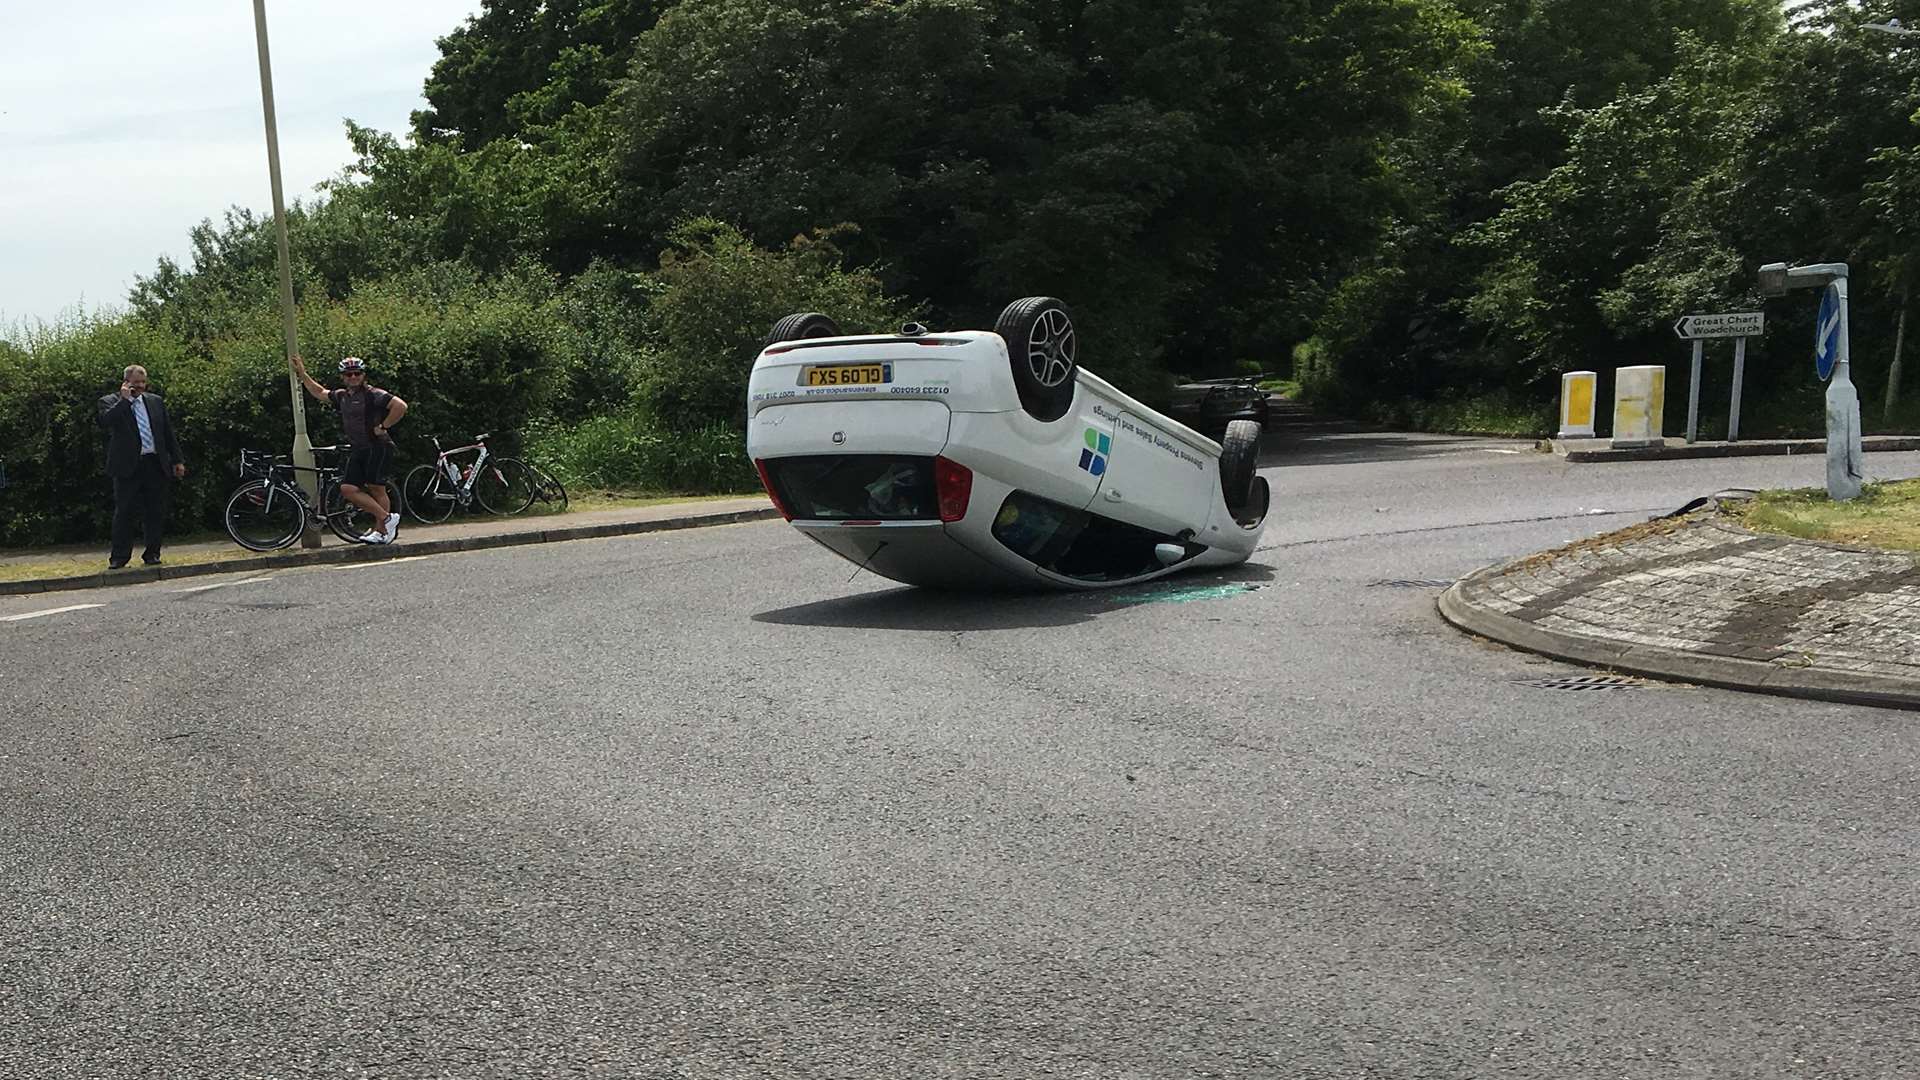 The car flipped onto it's roof. Pic: Alex Stout from Club Grappa Ashford cycling club